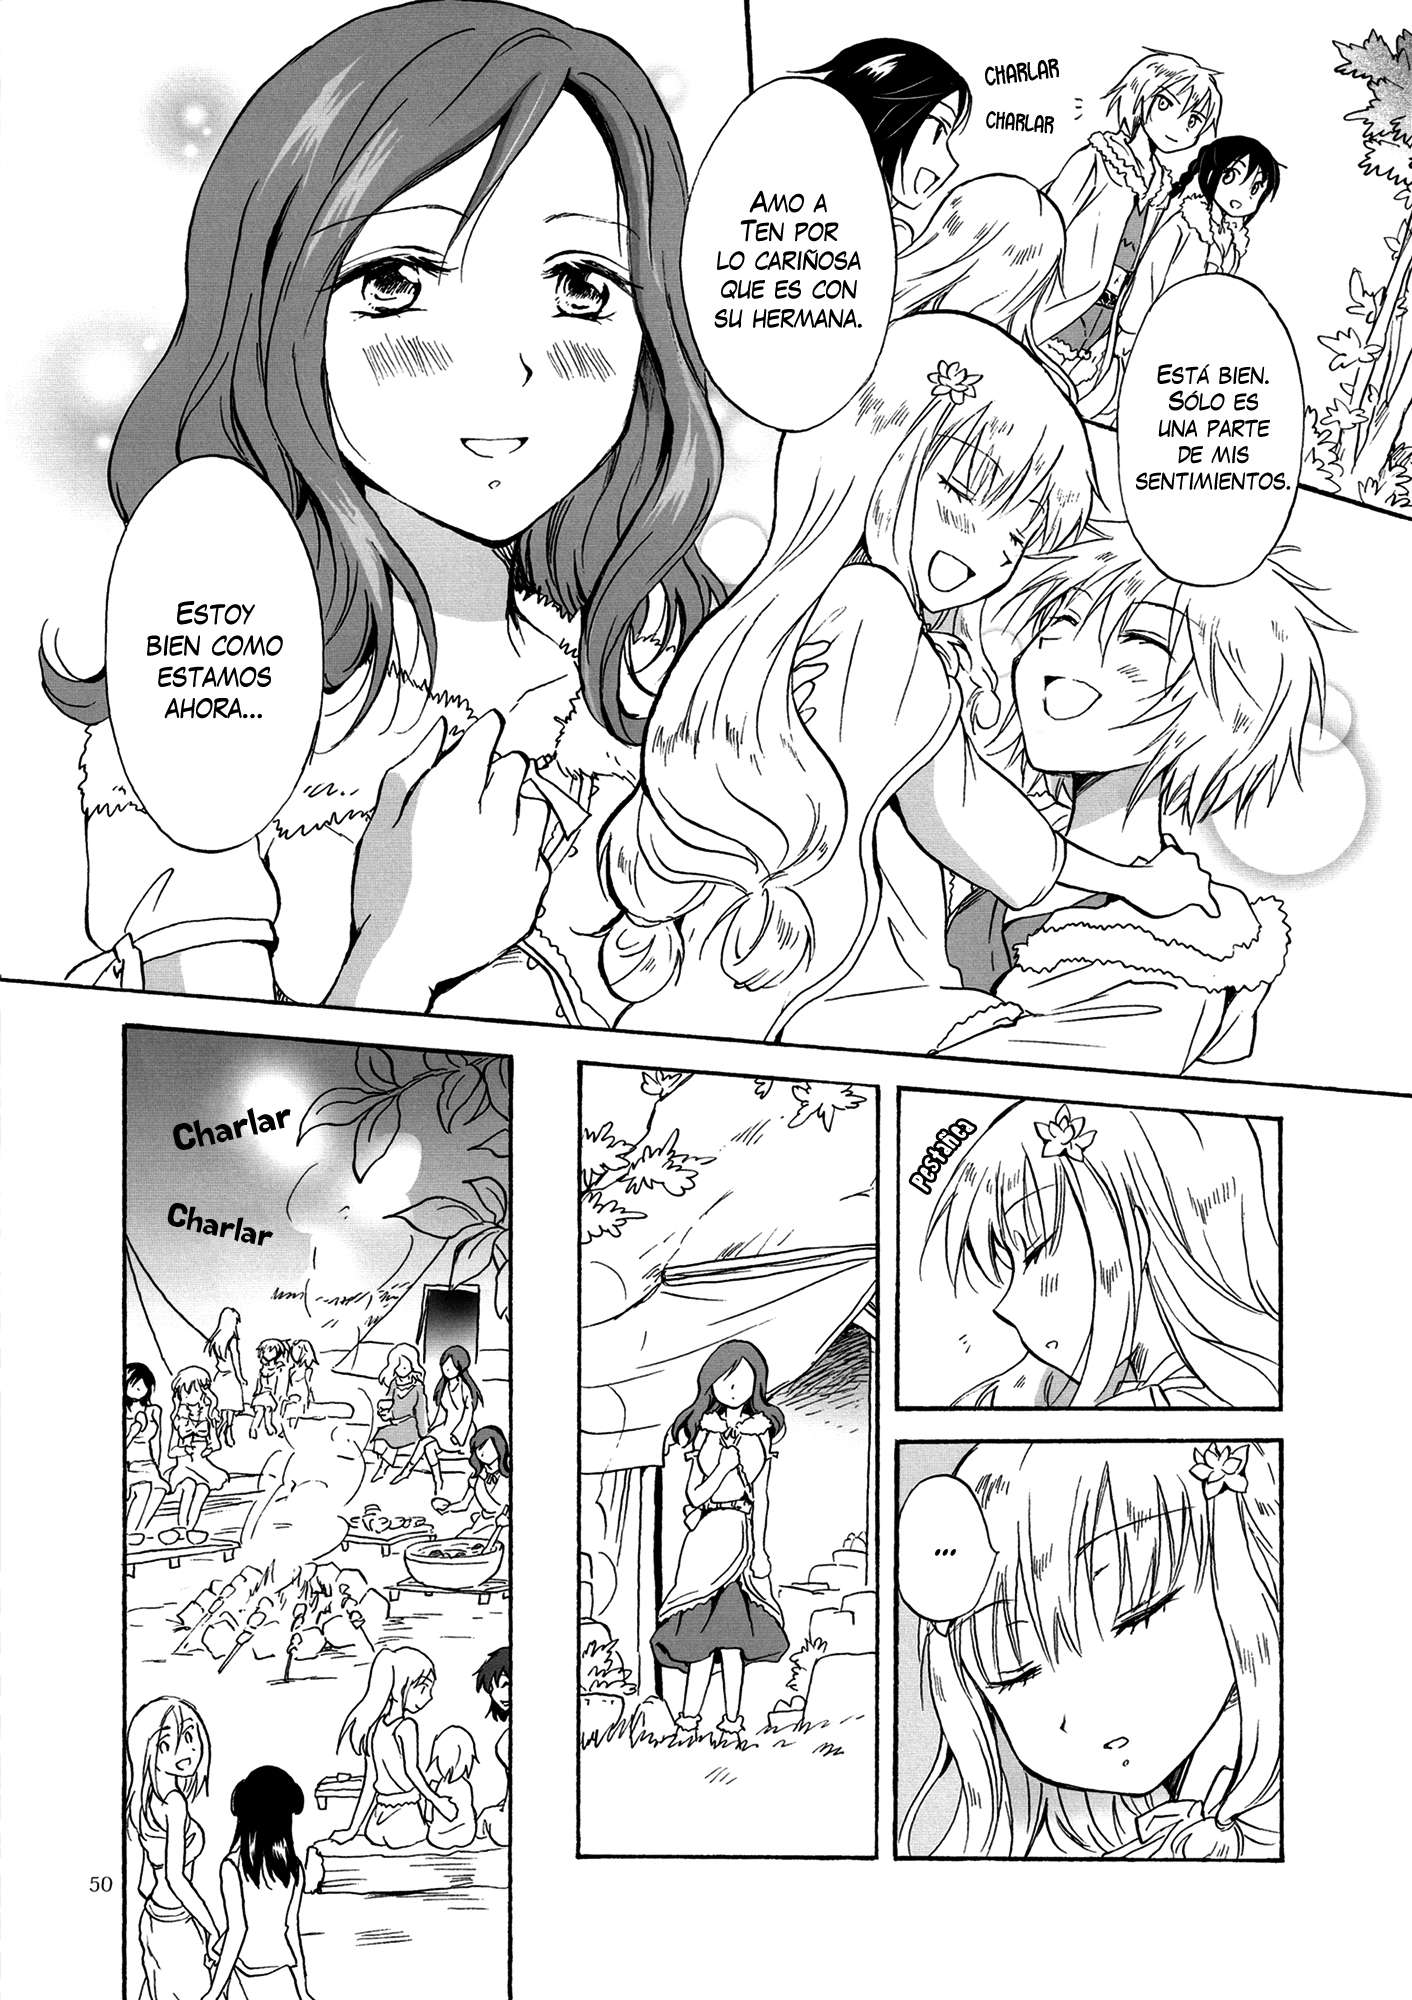 Earth Girls Chapter-3 - 7